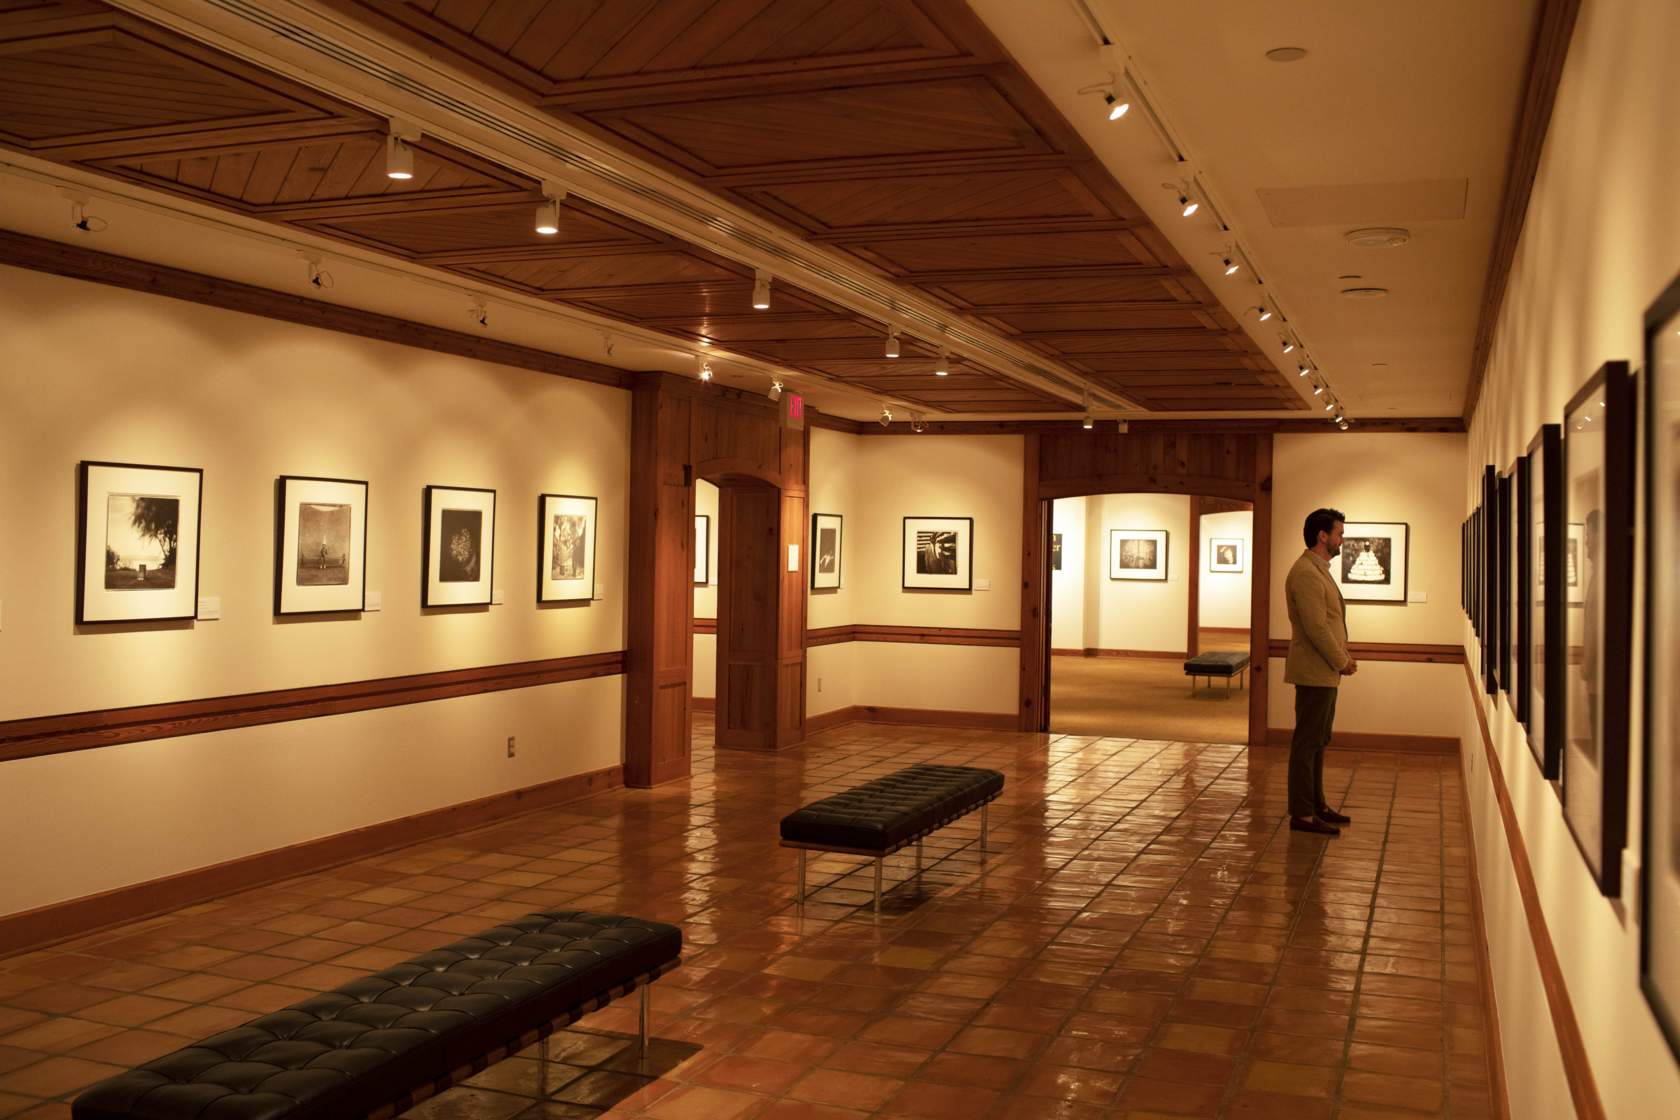 Video of The Wittliff's galleries